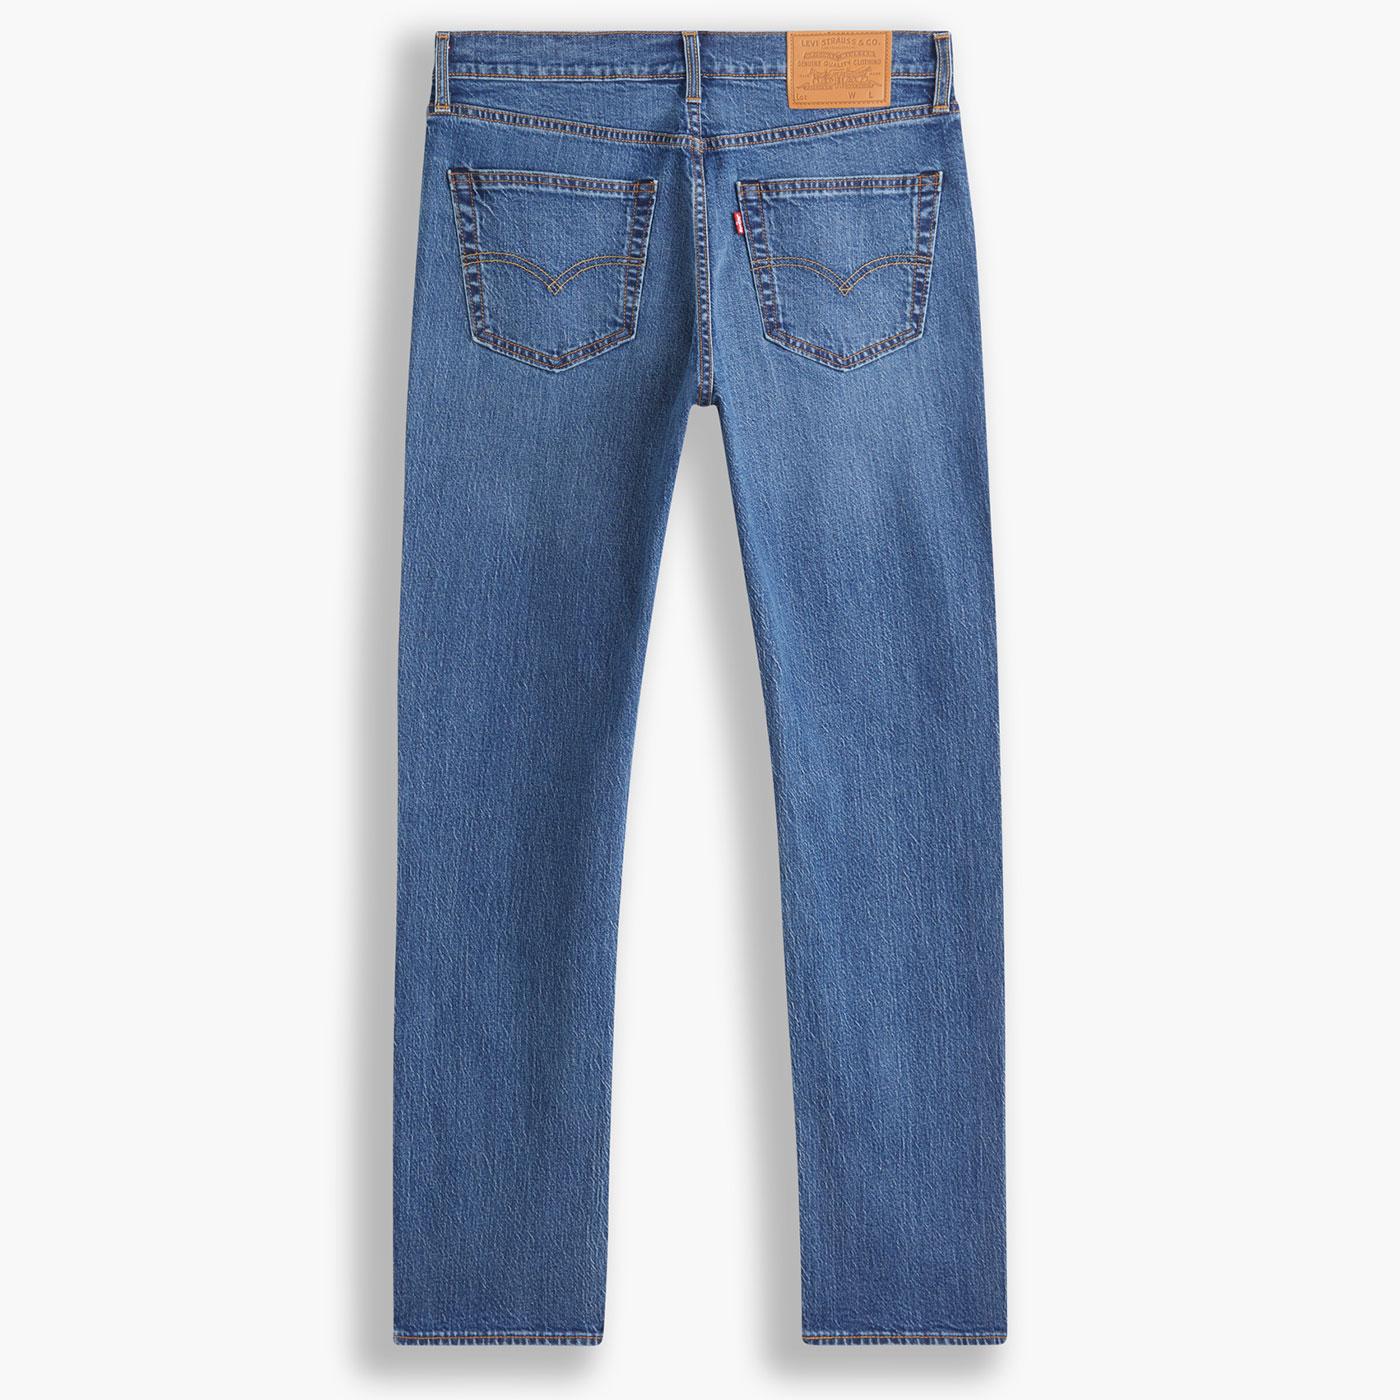 LEVI'S 511 Slim Retro Denim Jeans in Every Little Thing